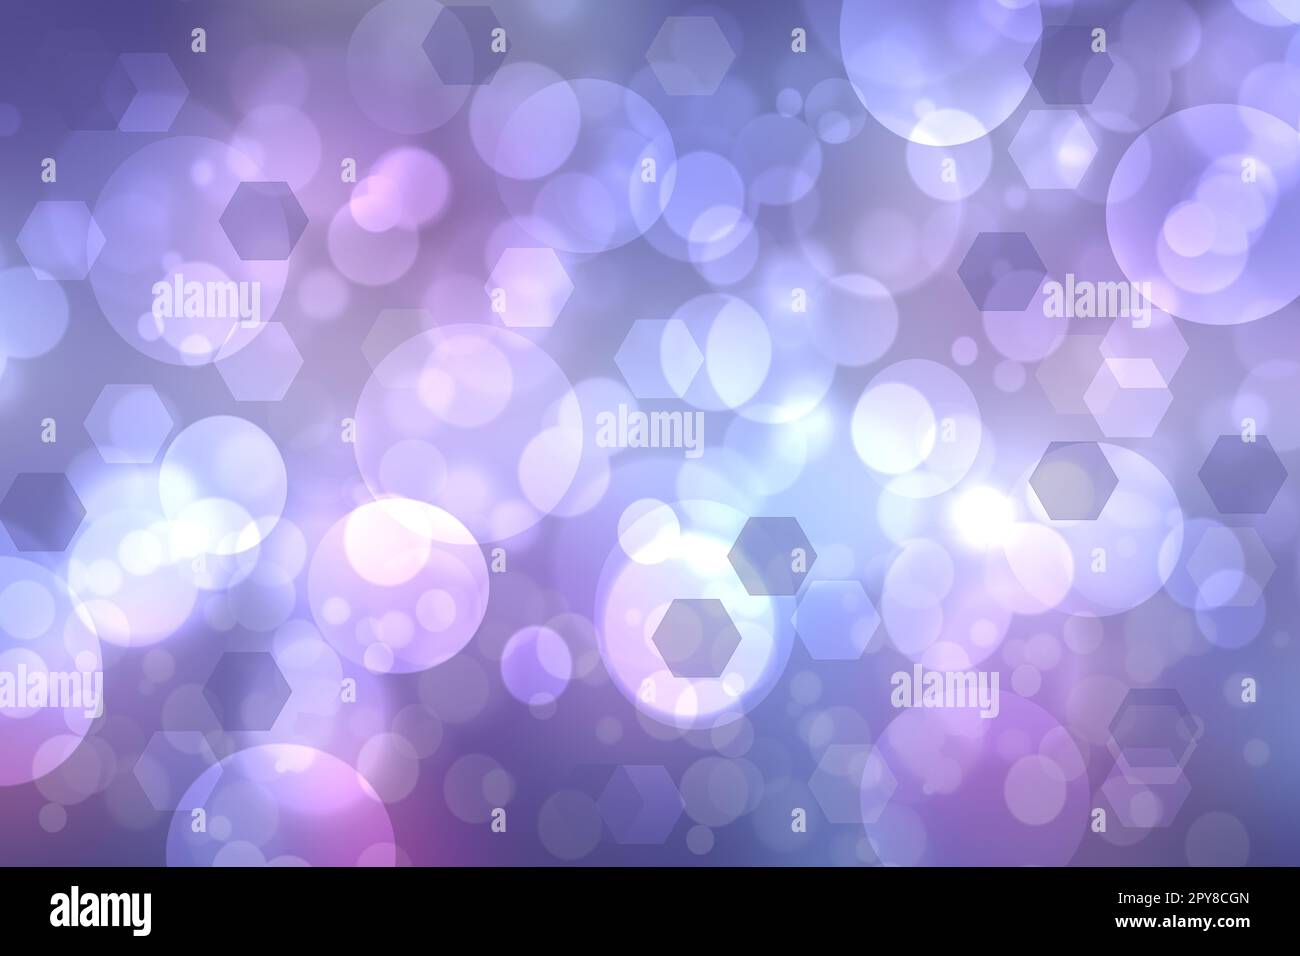 Abstract colorful violet modern futuristic technology and business background texture with mixed geometrical figures. Medical structure, artificial intelligence and science presentation backdrop. Stock Photo